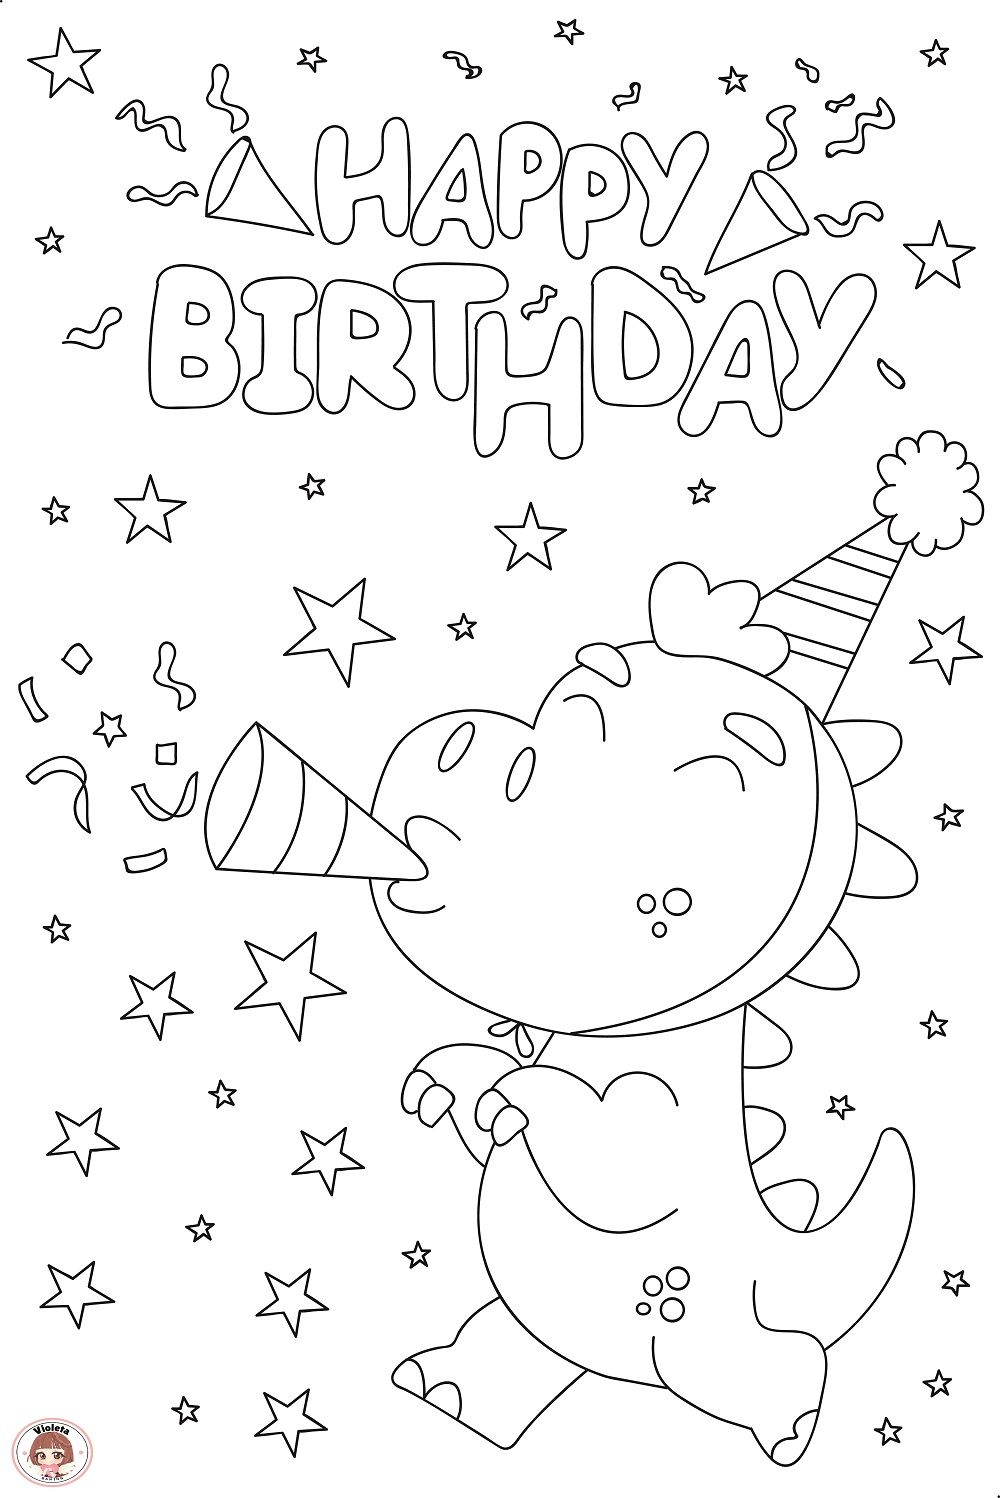 Free Printable Cute Dinosaur happy birthday Coloring Page - Fun Craft for Kids - Free Download!